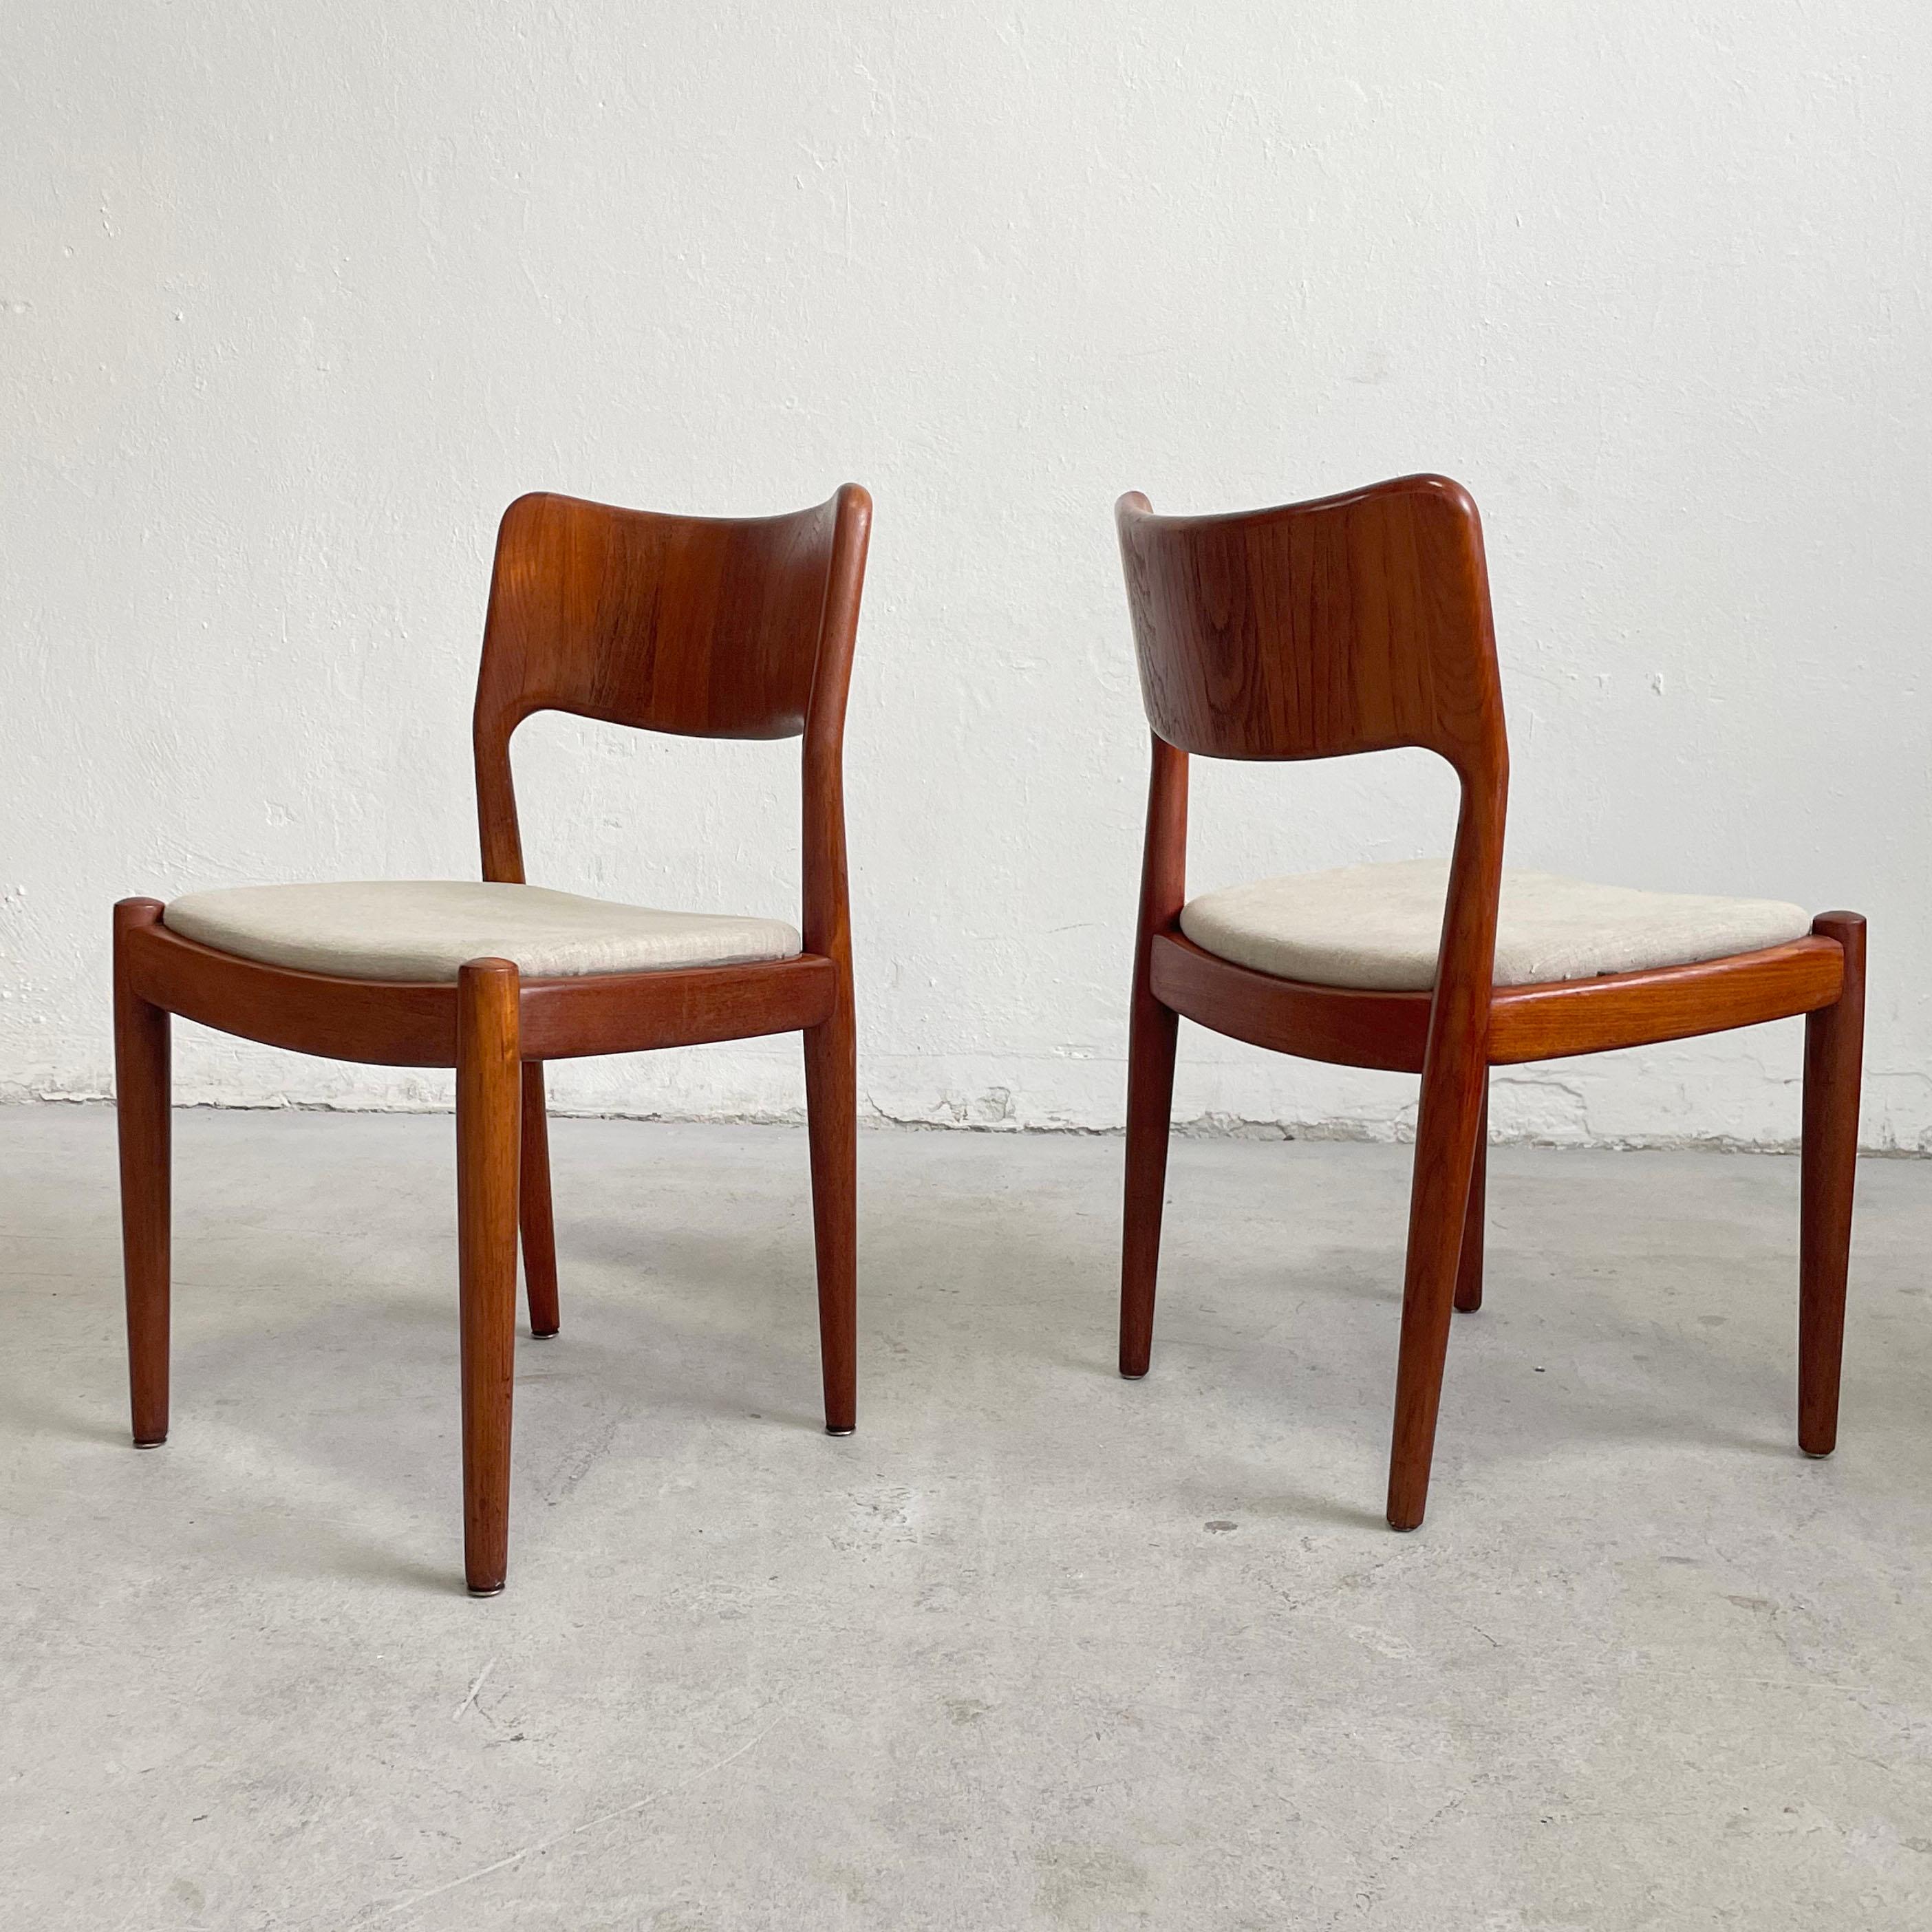 Fabric Set of 4 Vintage Scandinavian Mid-century Modern Teak Dining Chairs by Glostrup For Sale